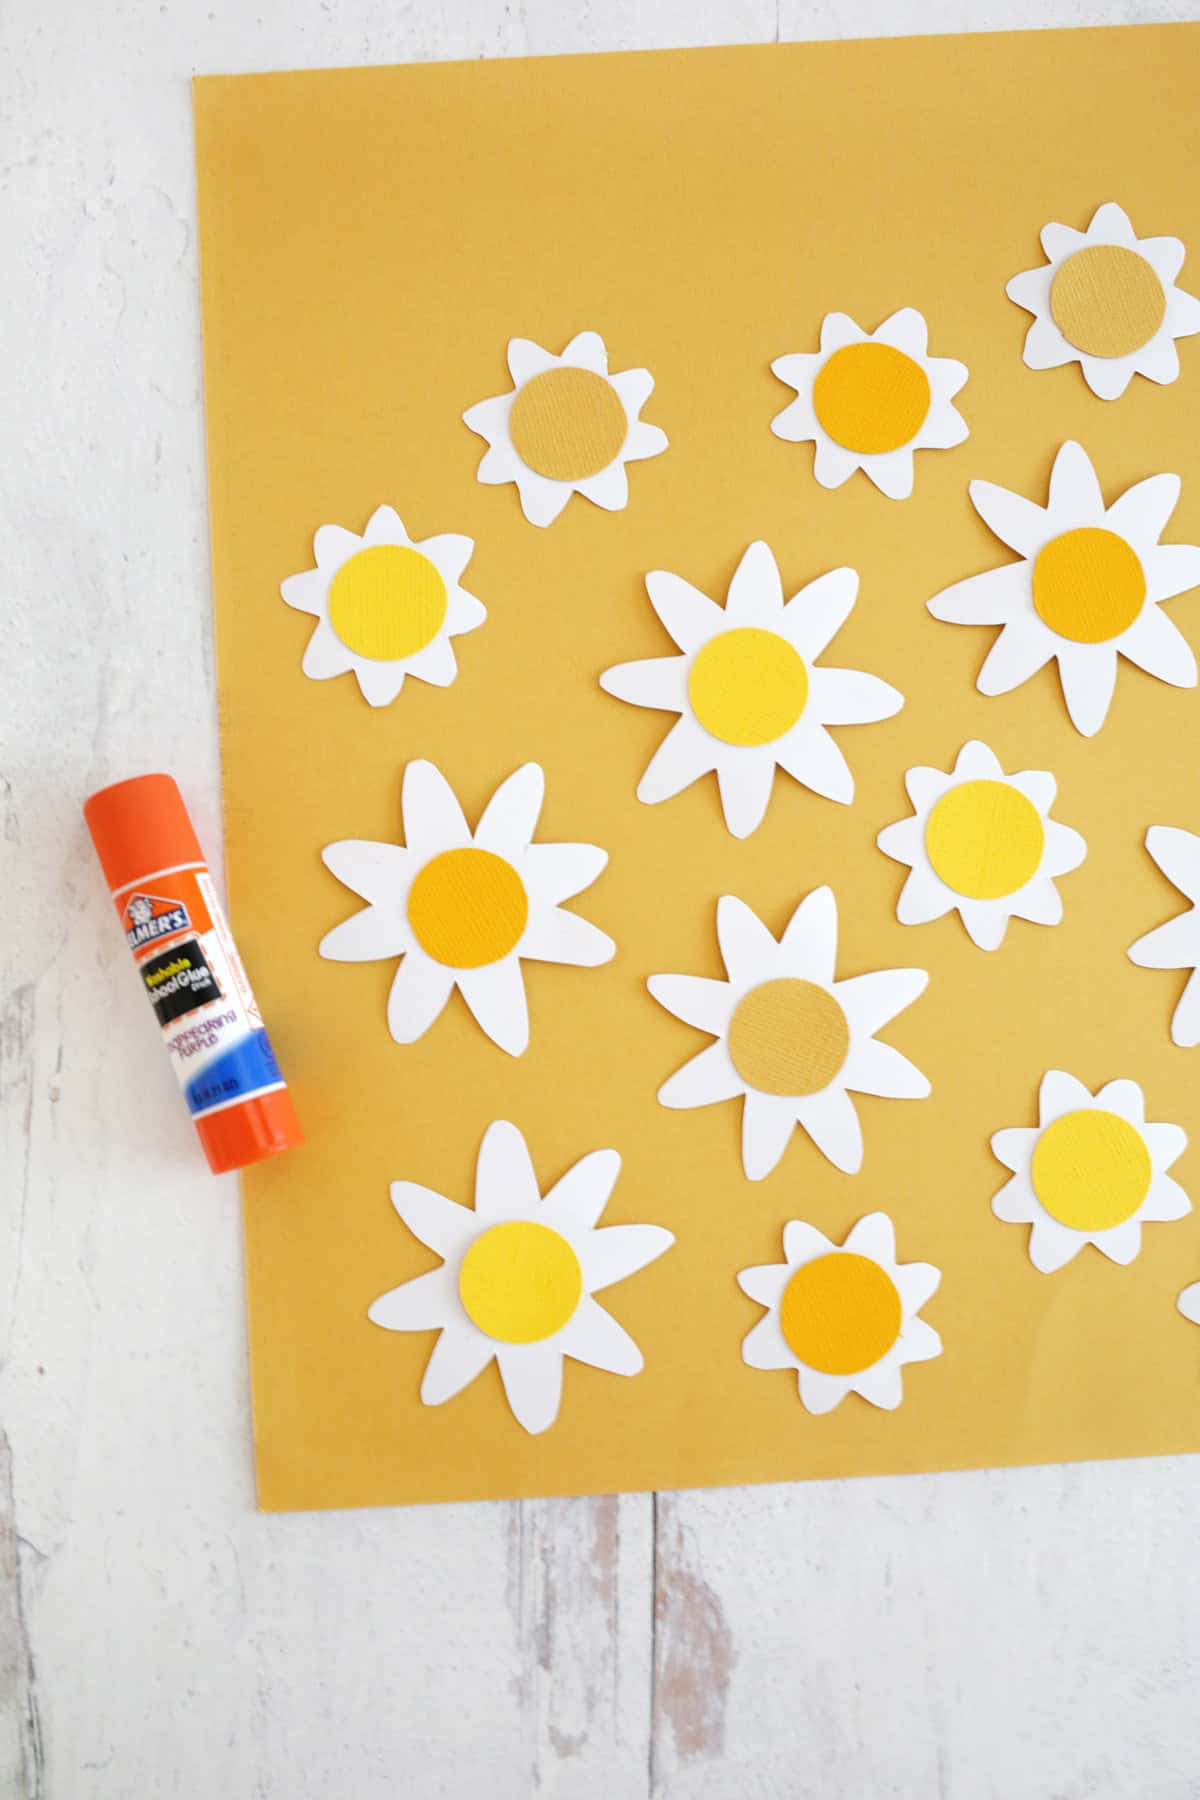 gluing paper daisies together